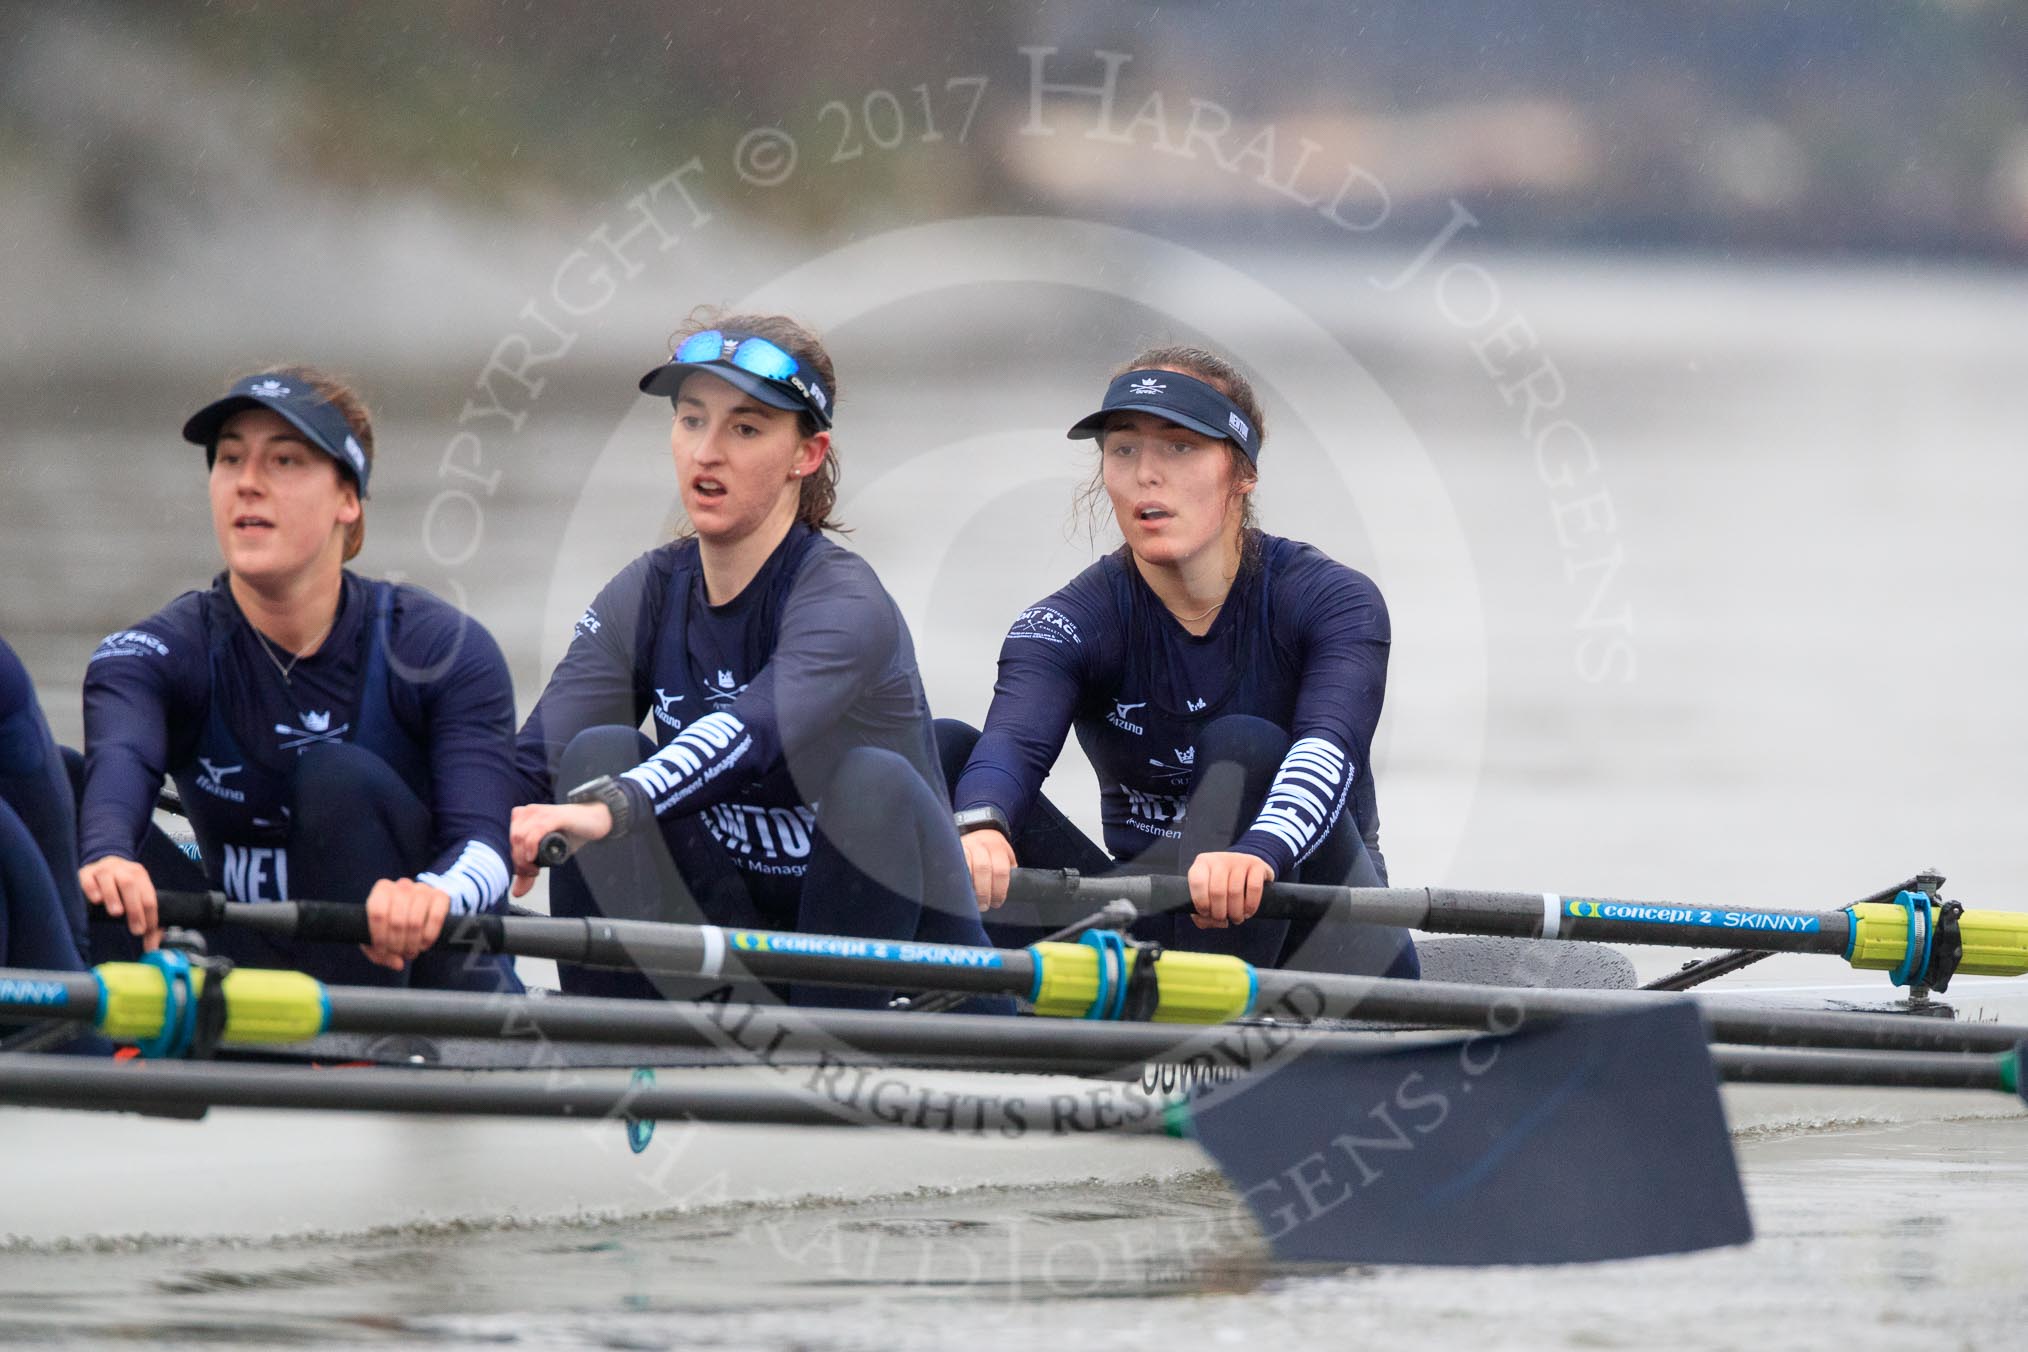 The Boat Race season 2018 - Women's Boat Race Trial Eights (OUWBC, Oxford): "Great Typhoon" near the Mile Post - 3 Madeline Goss, 2 Laura Depner, bow Matilda Edwards.
River Thames between Putney Bridge and Mortlake,
London SW15,

United Kingdom,
on 21 January 2018 at 14:33, image #87